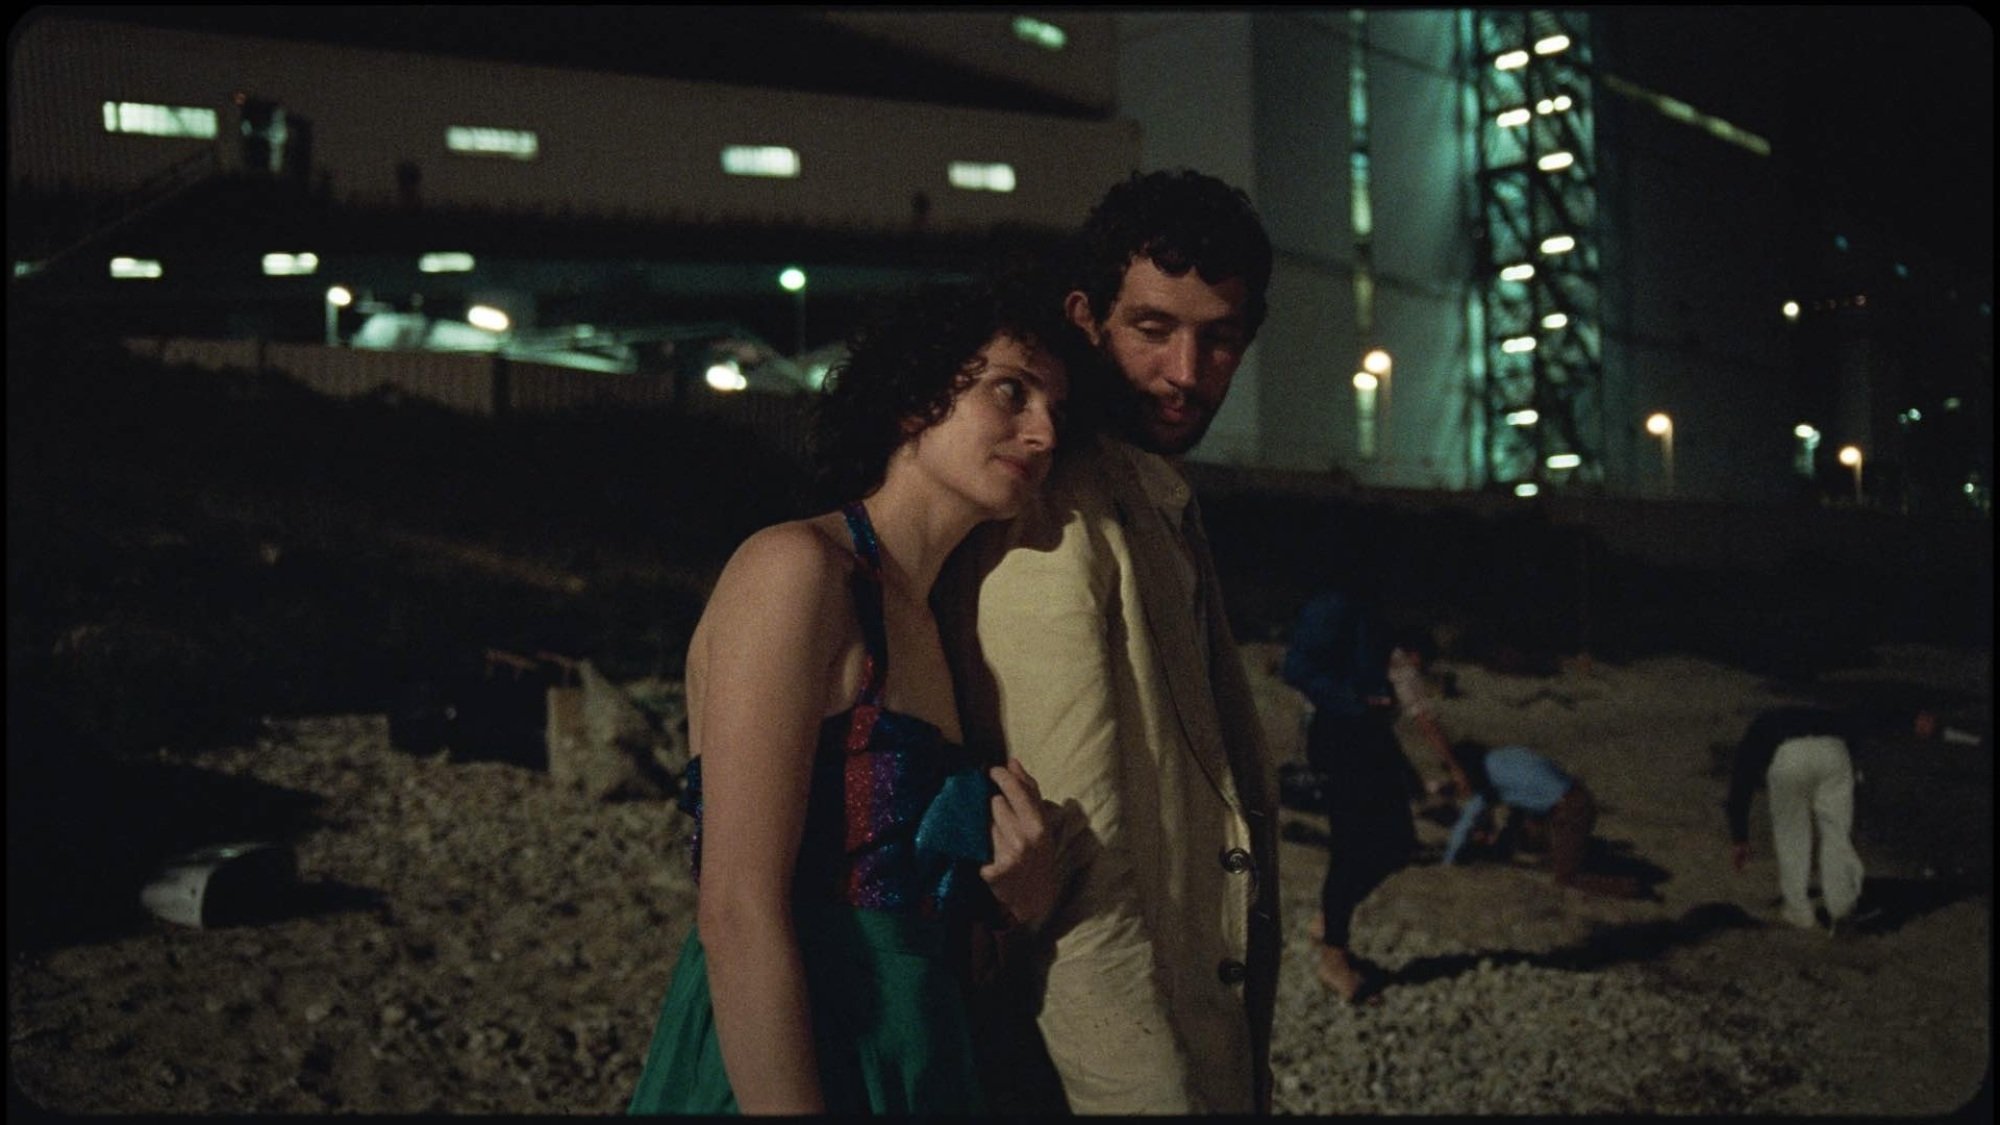 A woman leans her head on a man's shoulder while they stand on a beach below a factory.